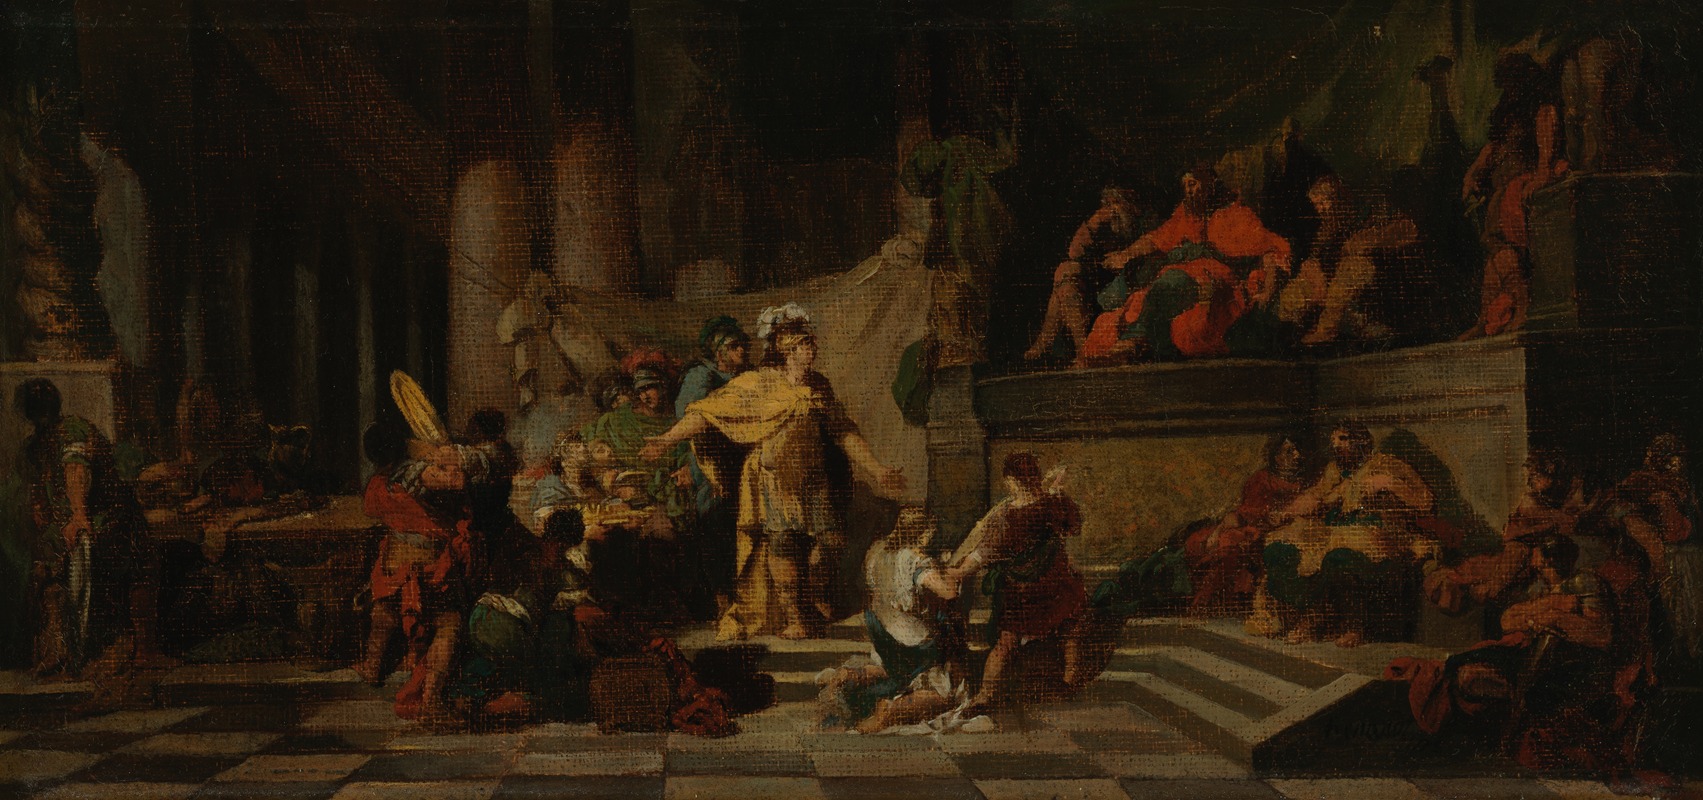 Jean-Baptiste Regnault - Aeneas Offering Presents to King Latinus and Asking Him for the Hand of His Daughter